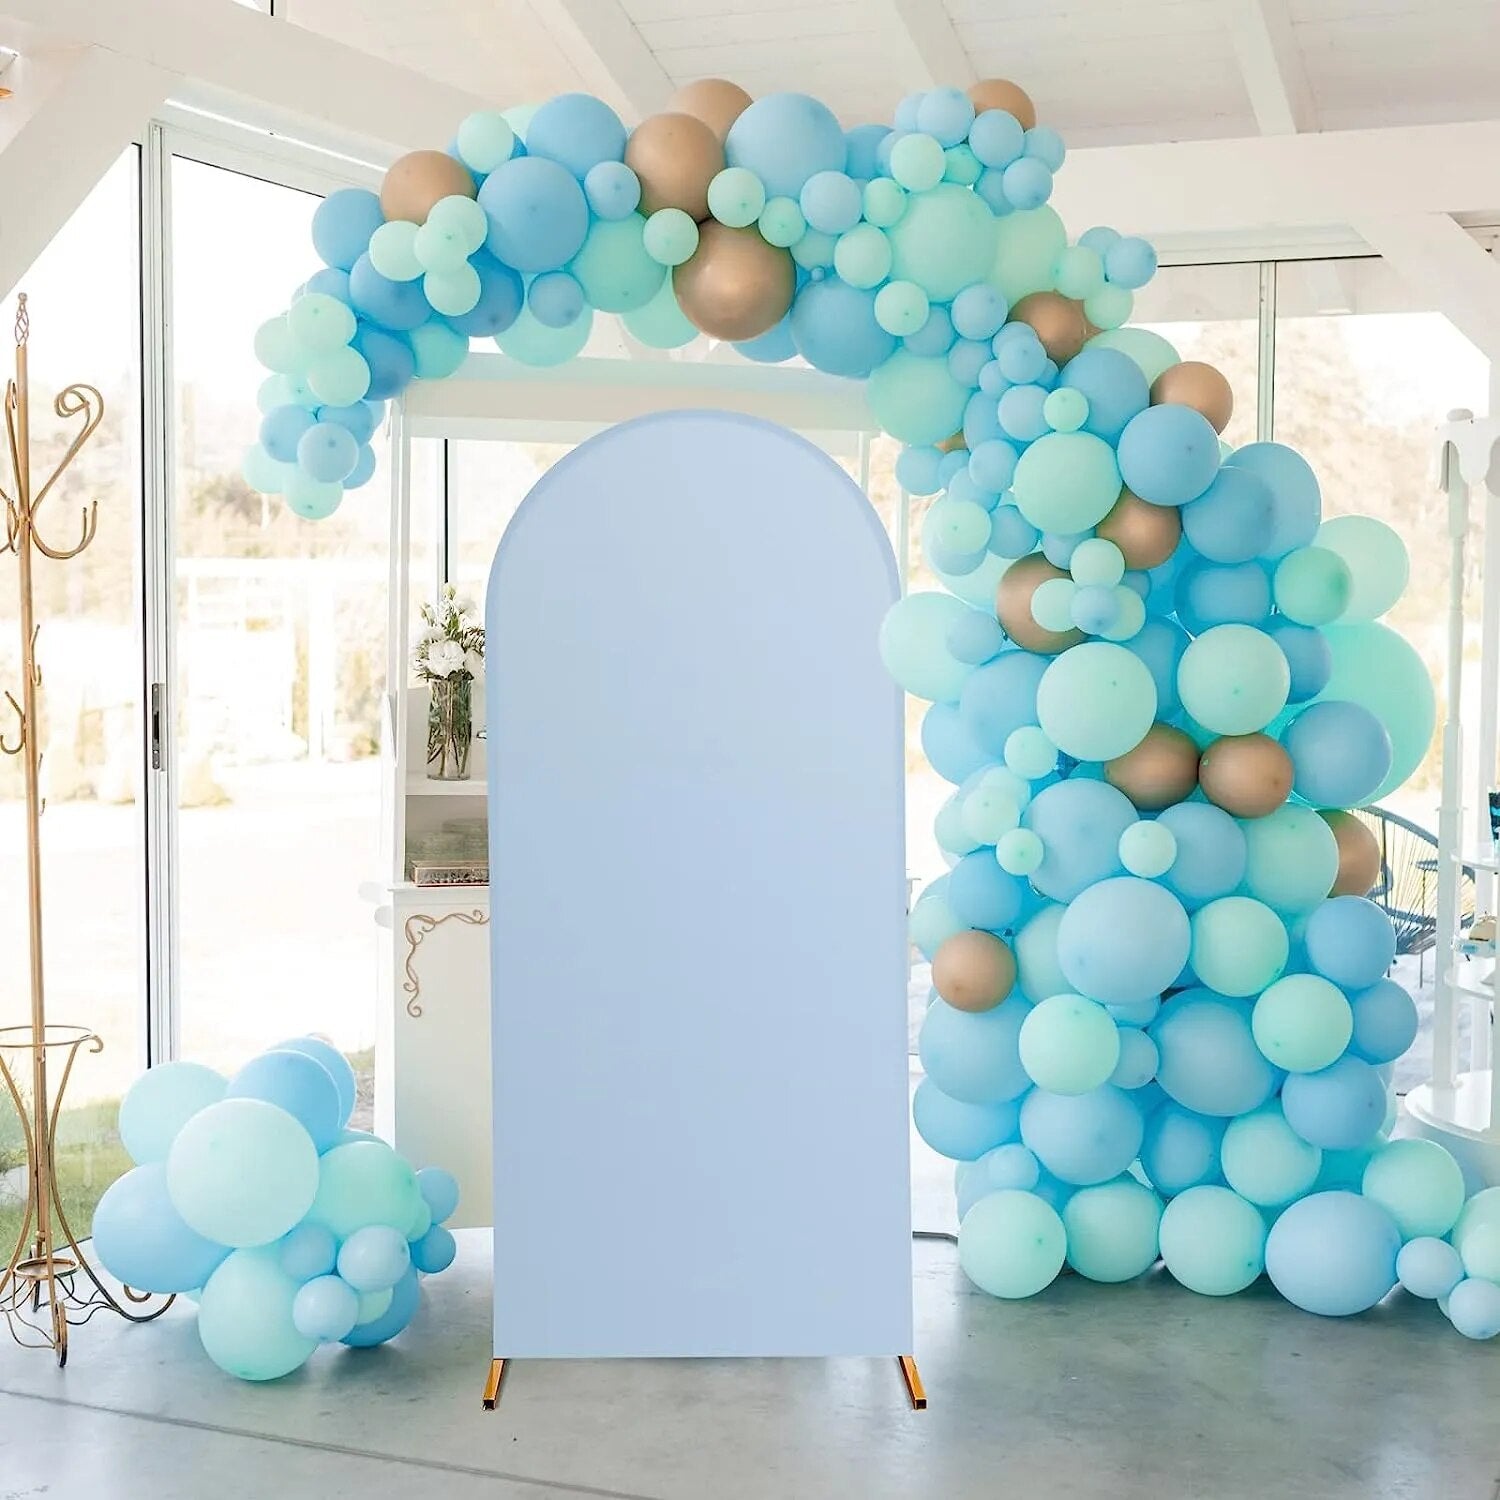 Avezano Arch Wall Backdrop Cover Solid Color Doubleside Photography Background Wedding Birthday Party Decoration Photo Studio